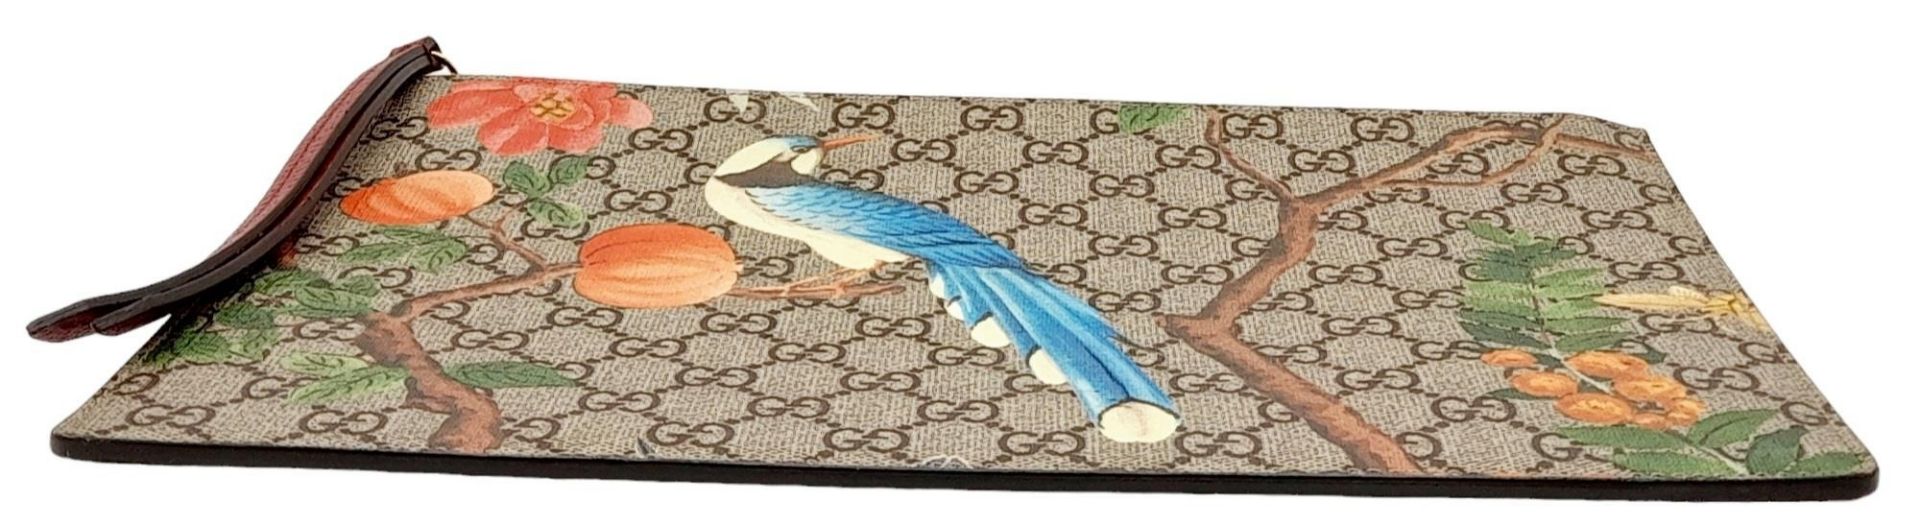 A Gucci Monogram 'Tian' Clutch Bag. Leather exterior with a depiction of a bird in nature, red - Image 3 of 7